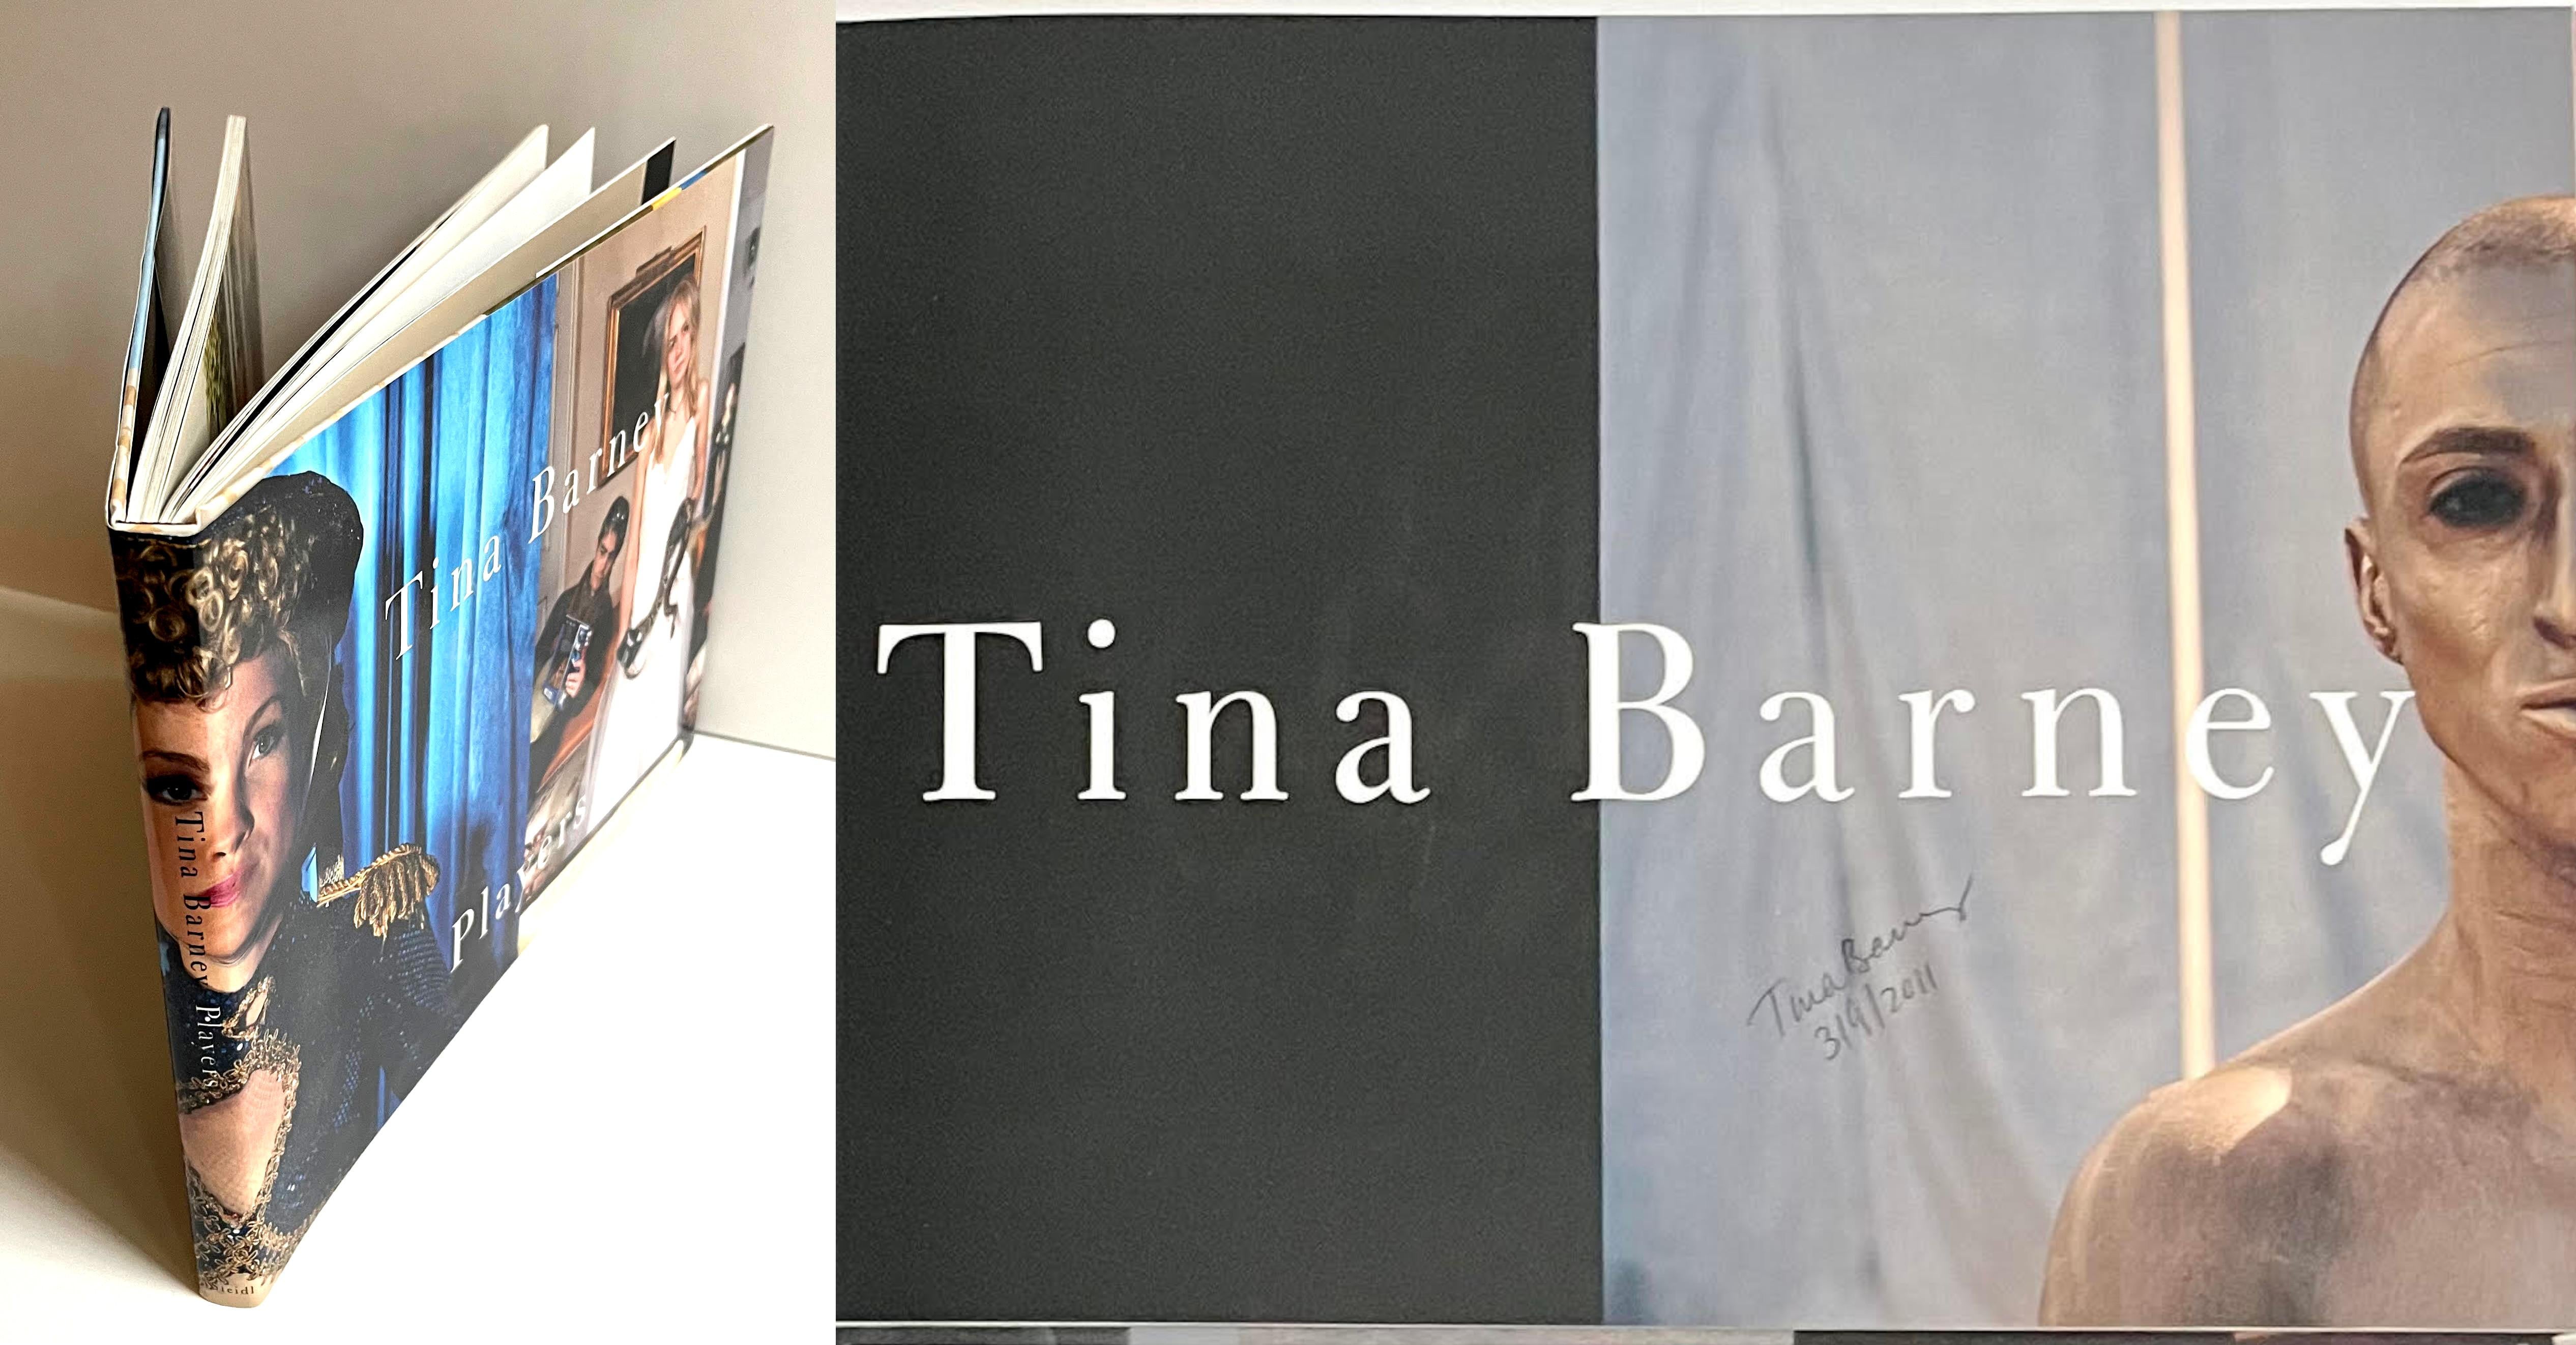 Tina Barney
Players (Signed and dated by Tina Barney), 2010
Hardback monograph with dust jacket (Hand signed and dated by Tina Barney)
Signed and dated 3/9/2011 by Tina Barney
9 × 12 × 3/4 inches

Signed and dated 3/9/2011 by Tina Barney on the